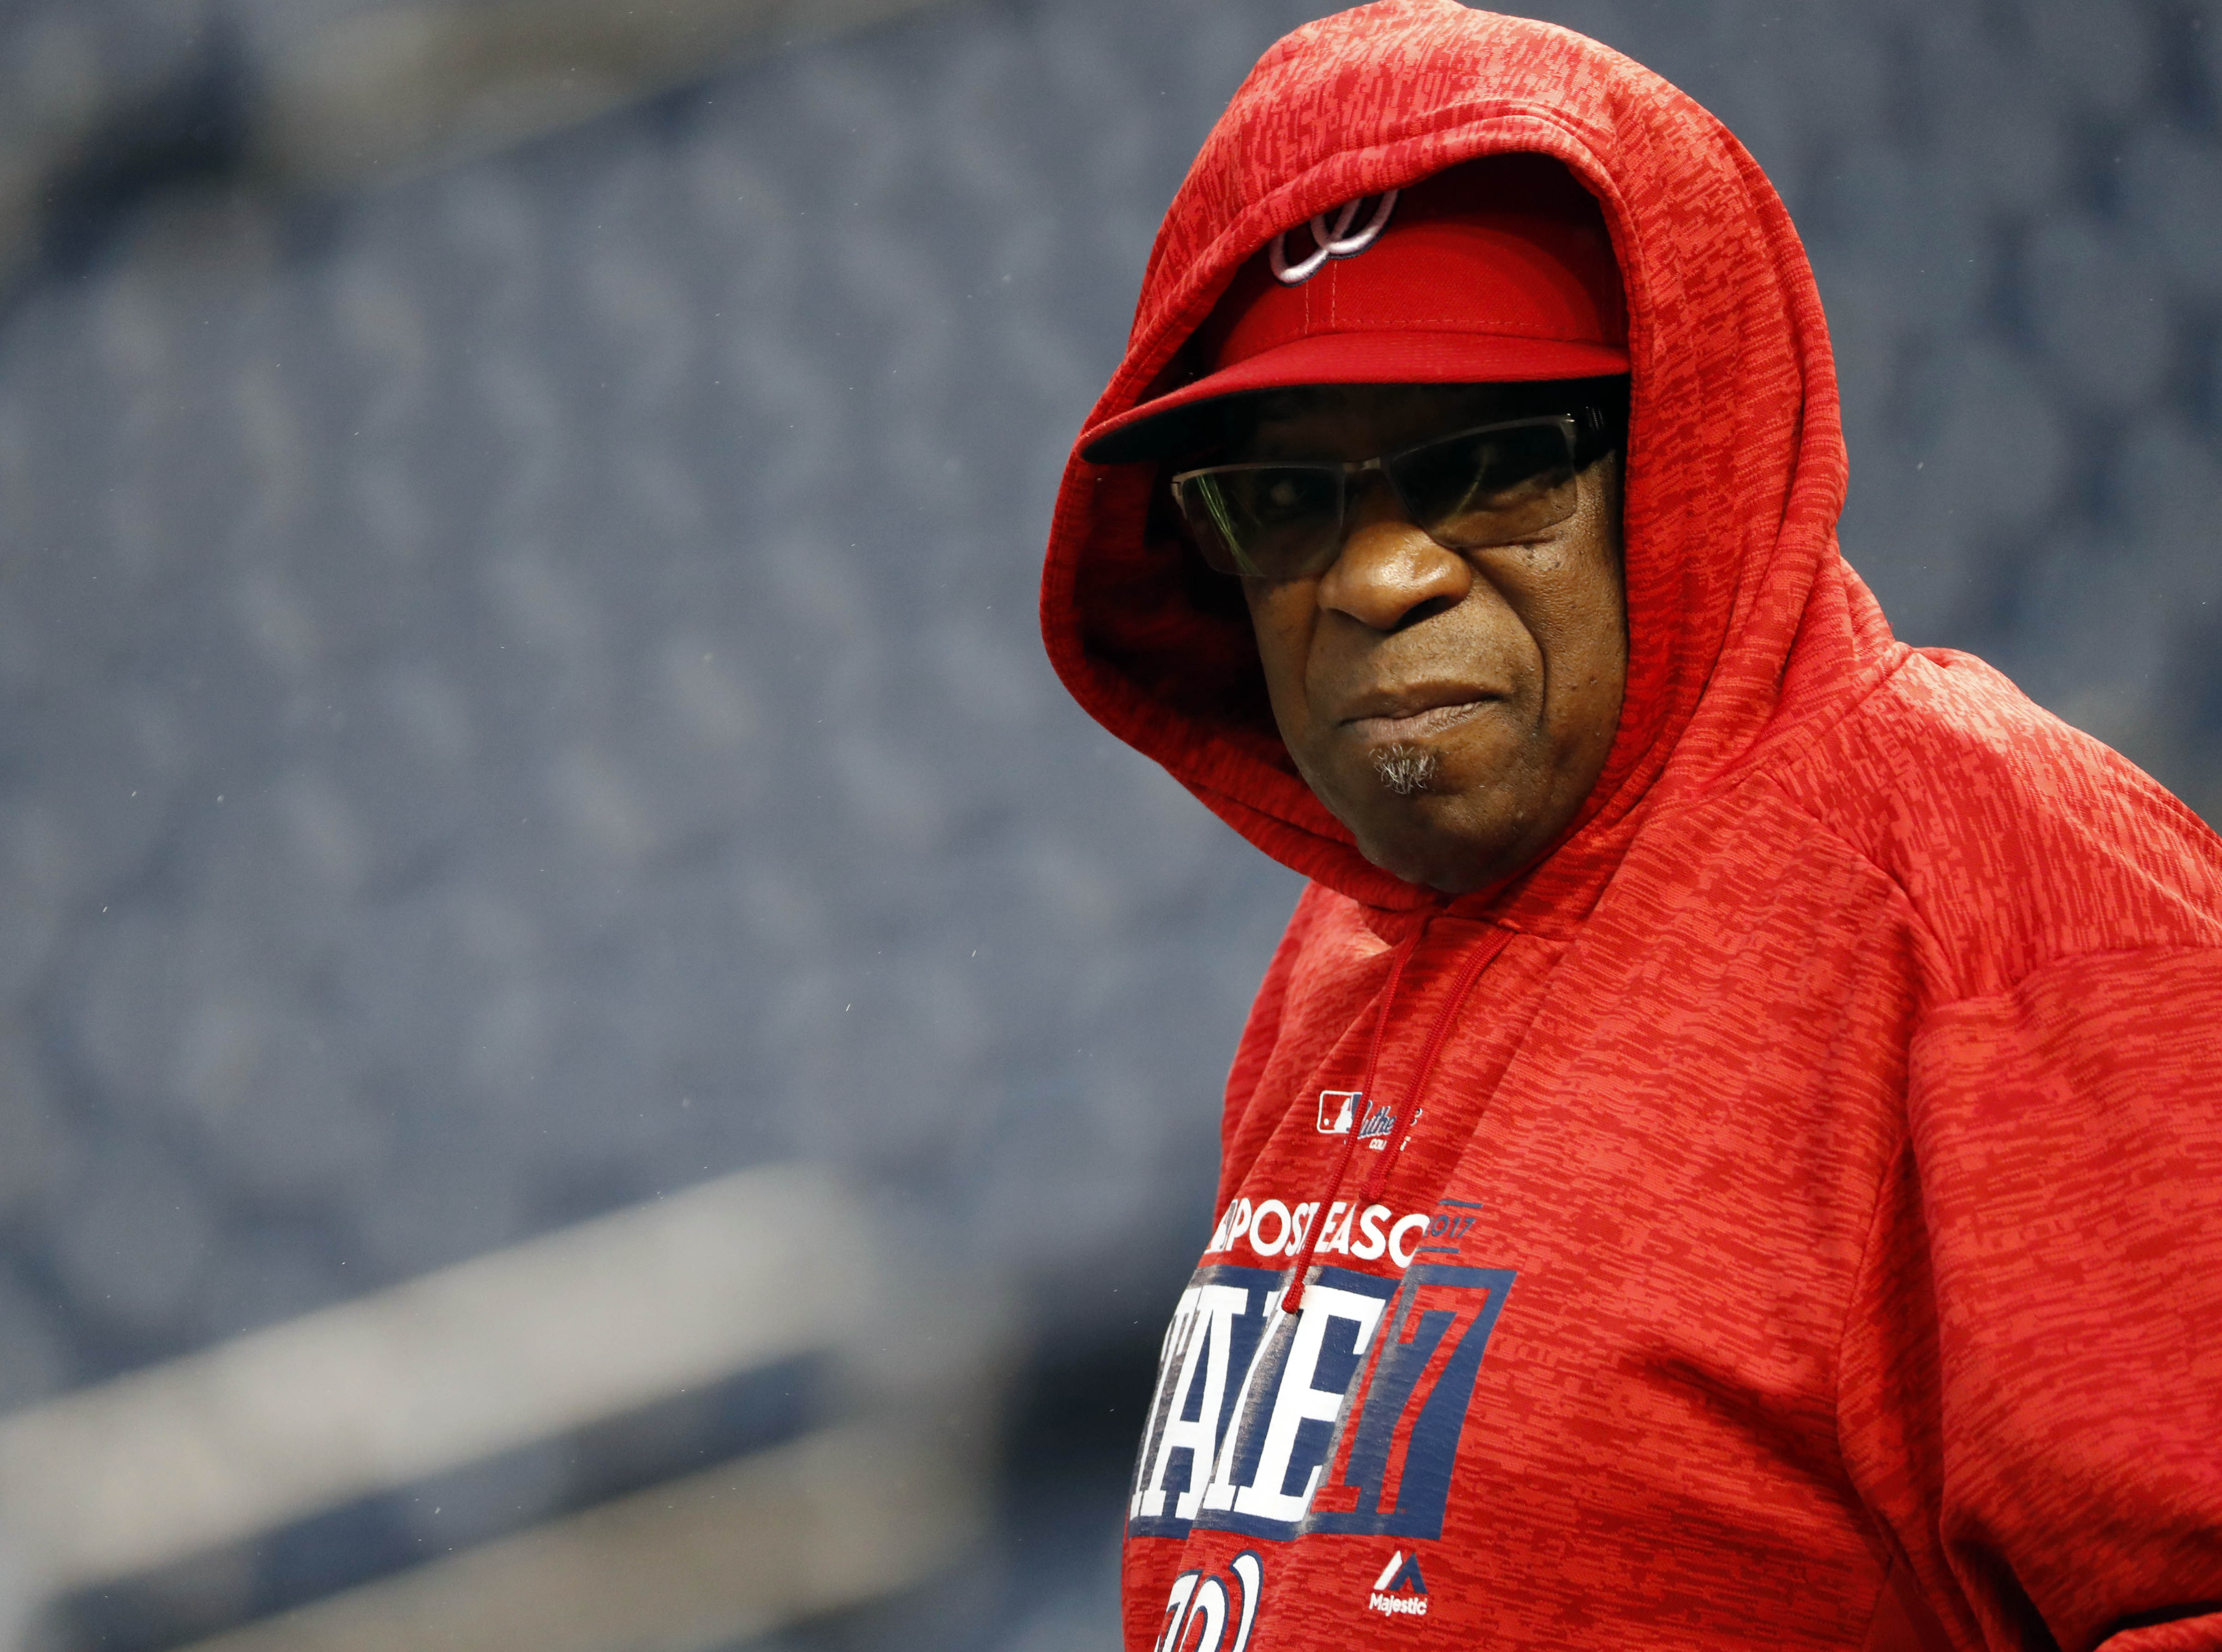 Dusty Baker, dismissed as Nationals manager, calls club's decision